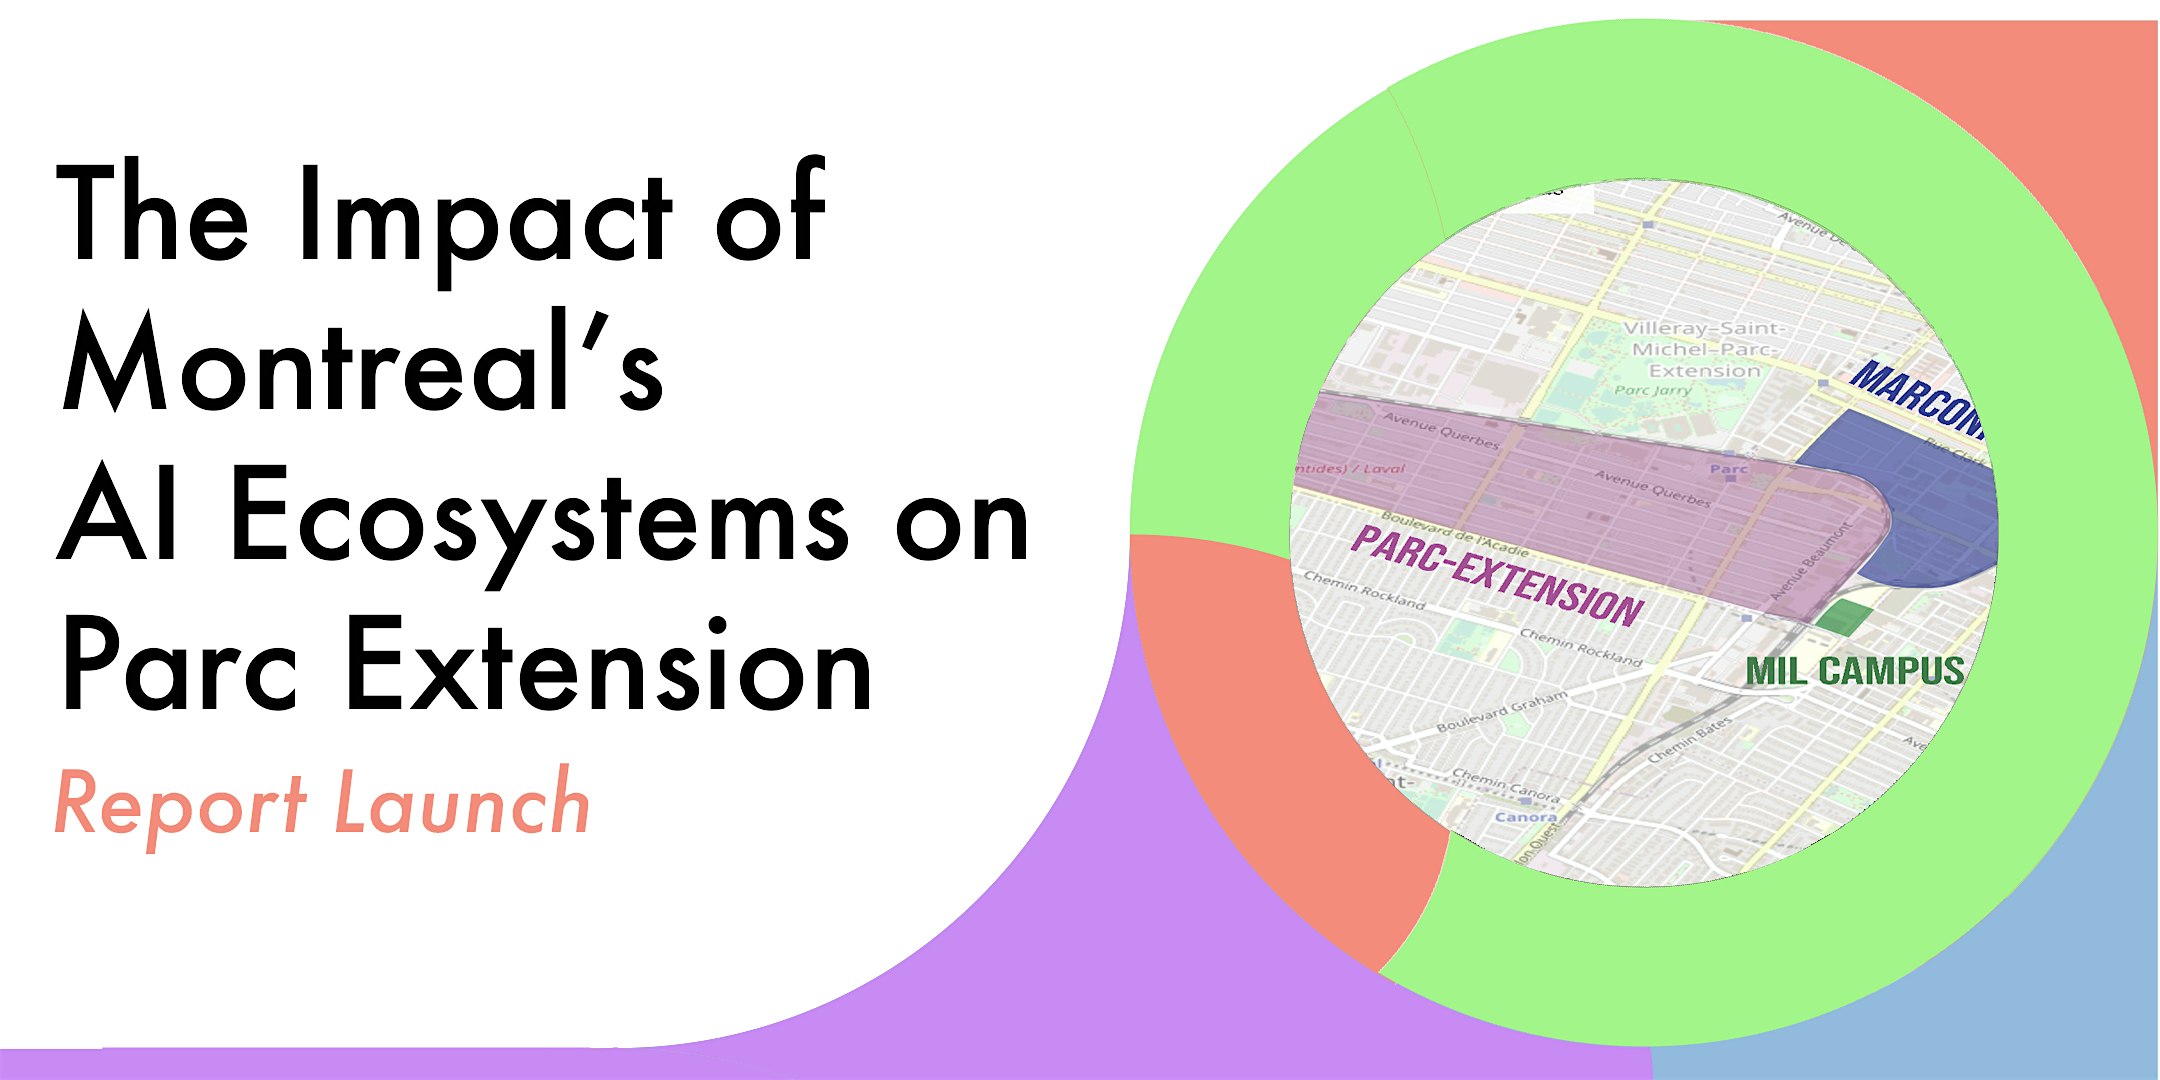 The Impact of Montreal’s AI Ecosystems on Parc Extension